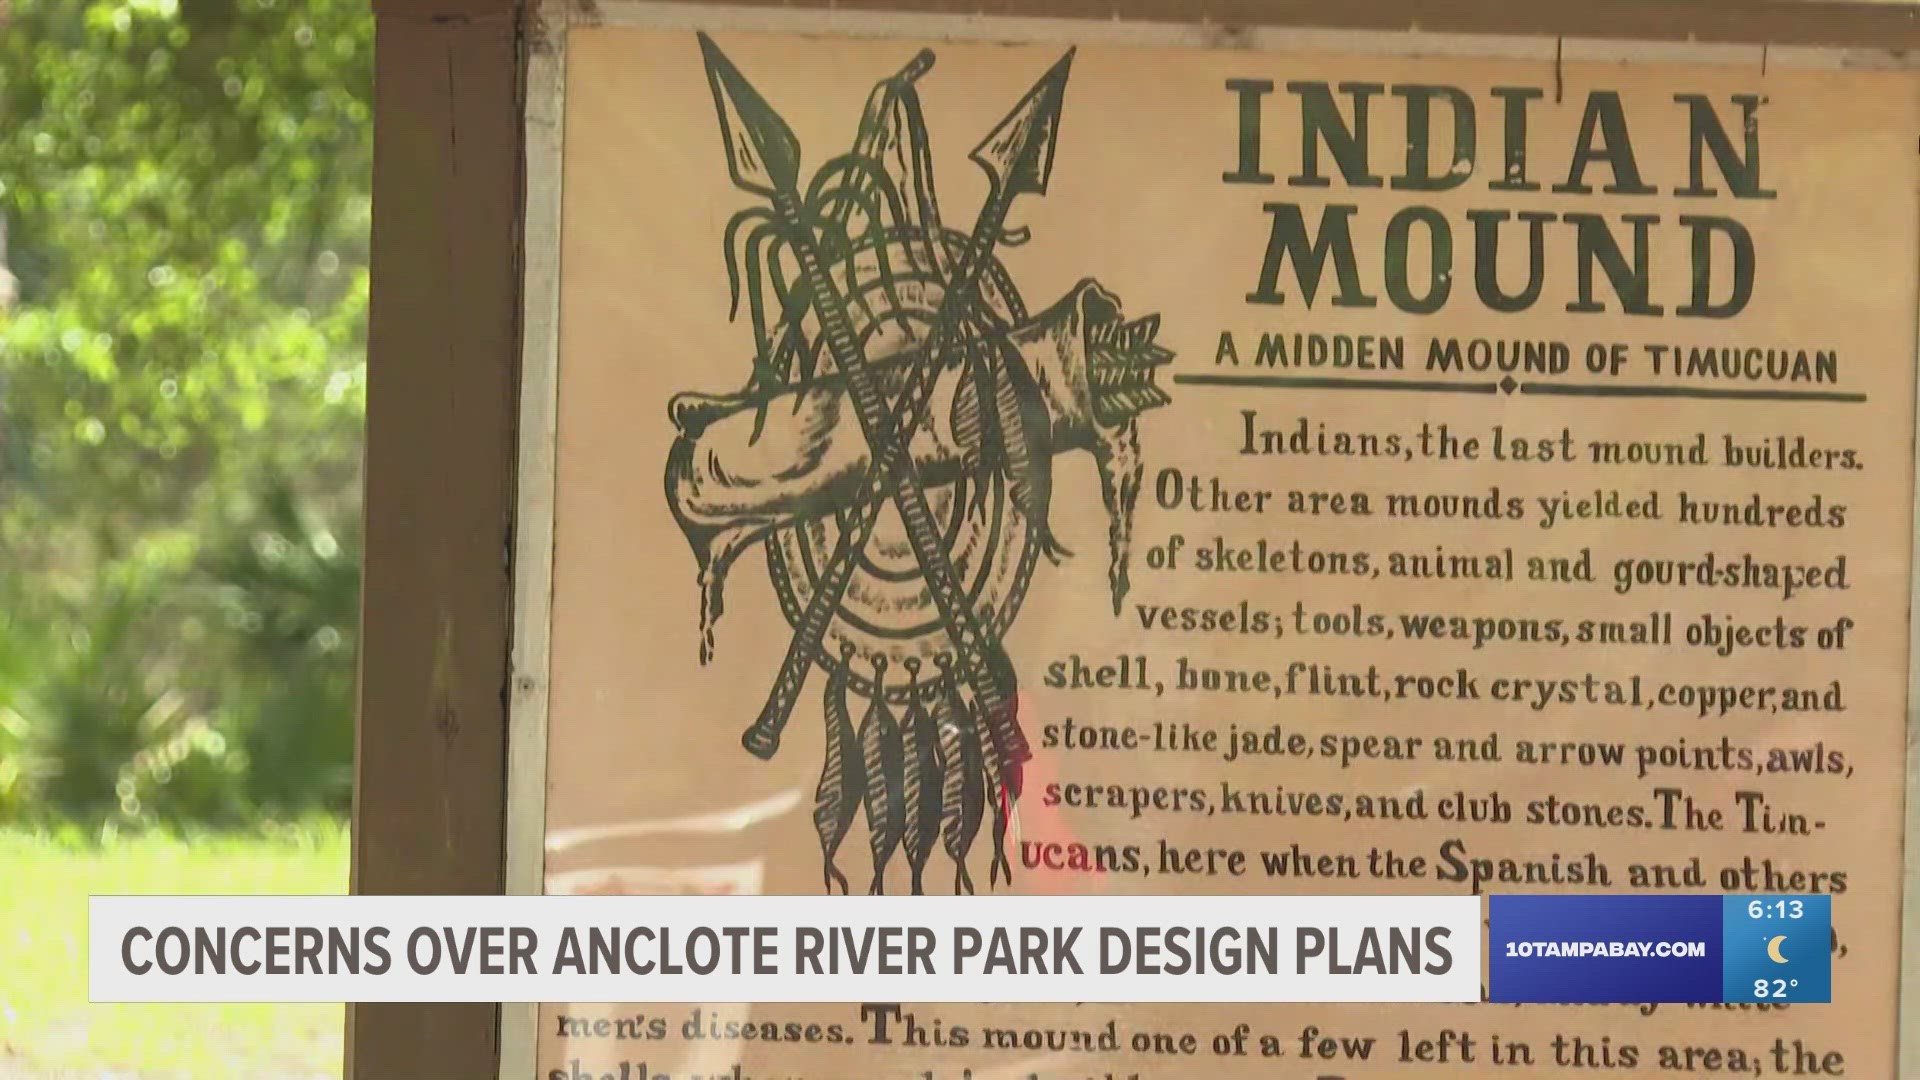 A Native American mound at the park is known to contain skeletal remains, tools and weapons.